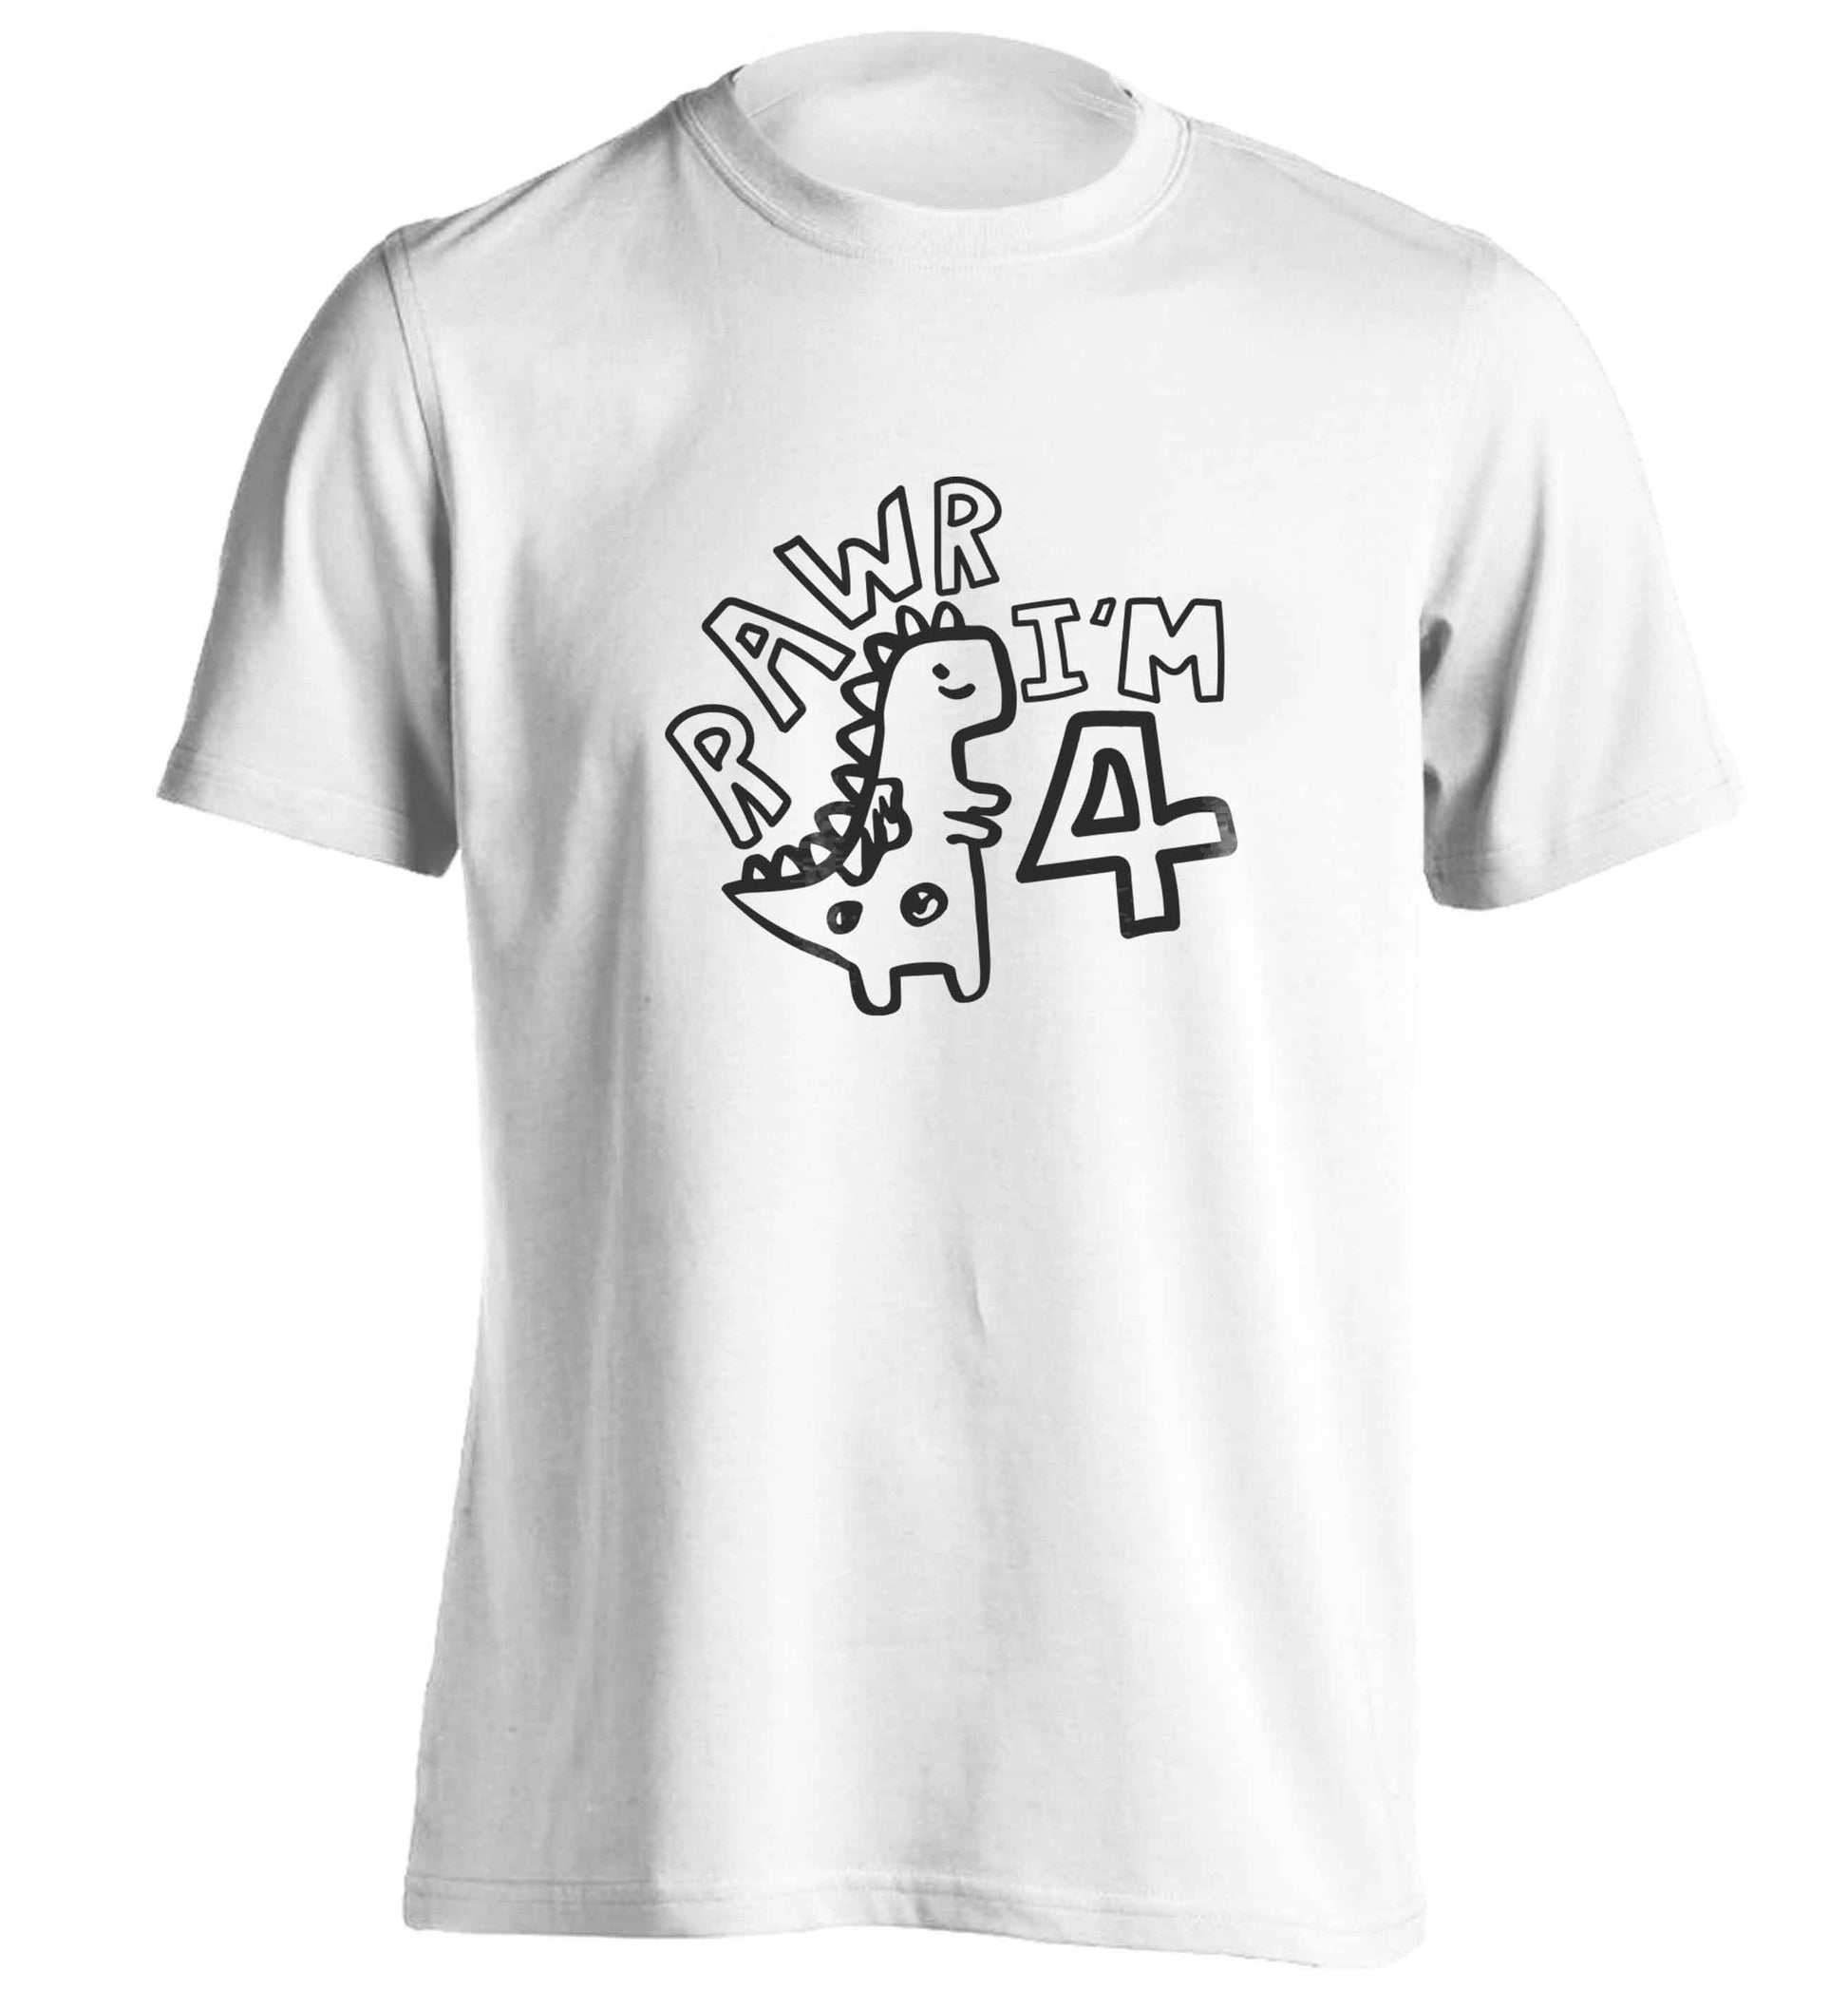 Rawr I'm four - personalise with ANY age! adults unisex white Tshirt 2XL